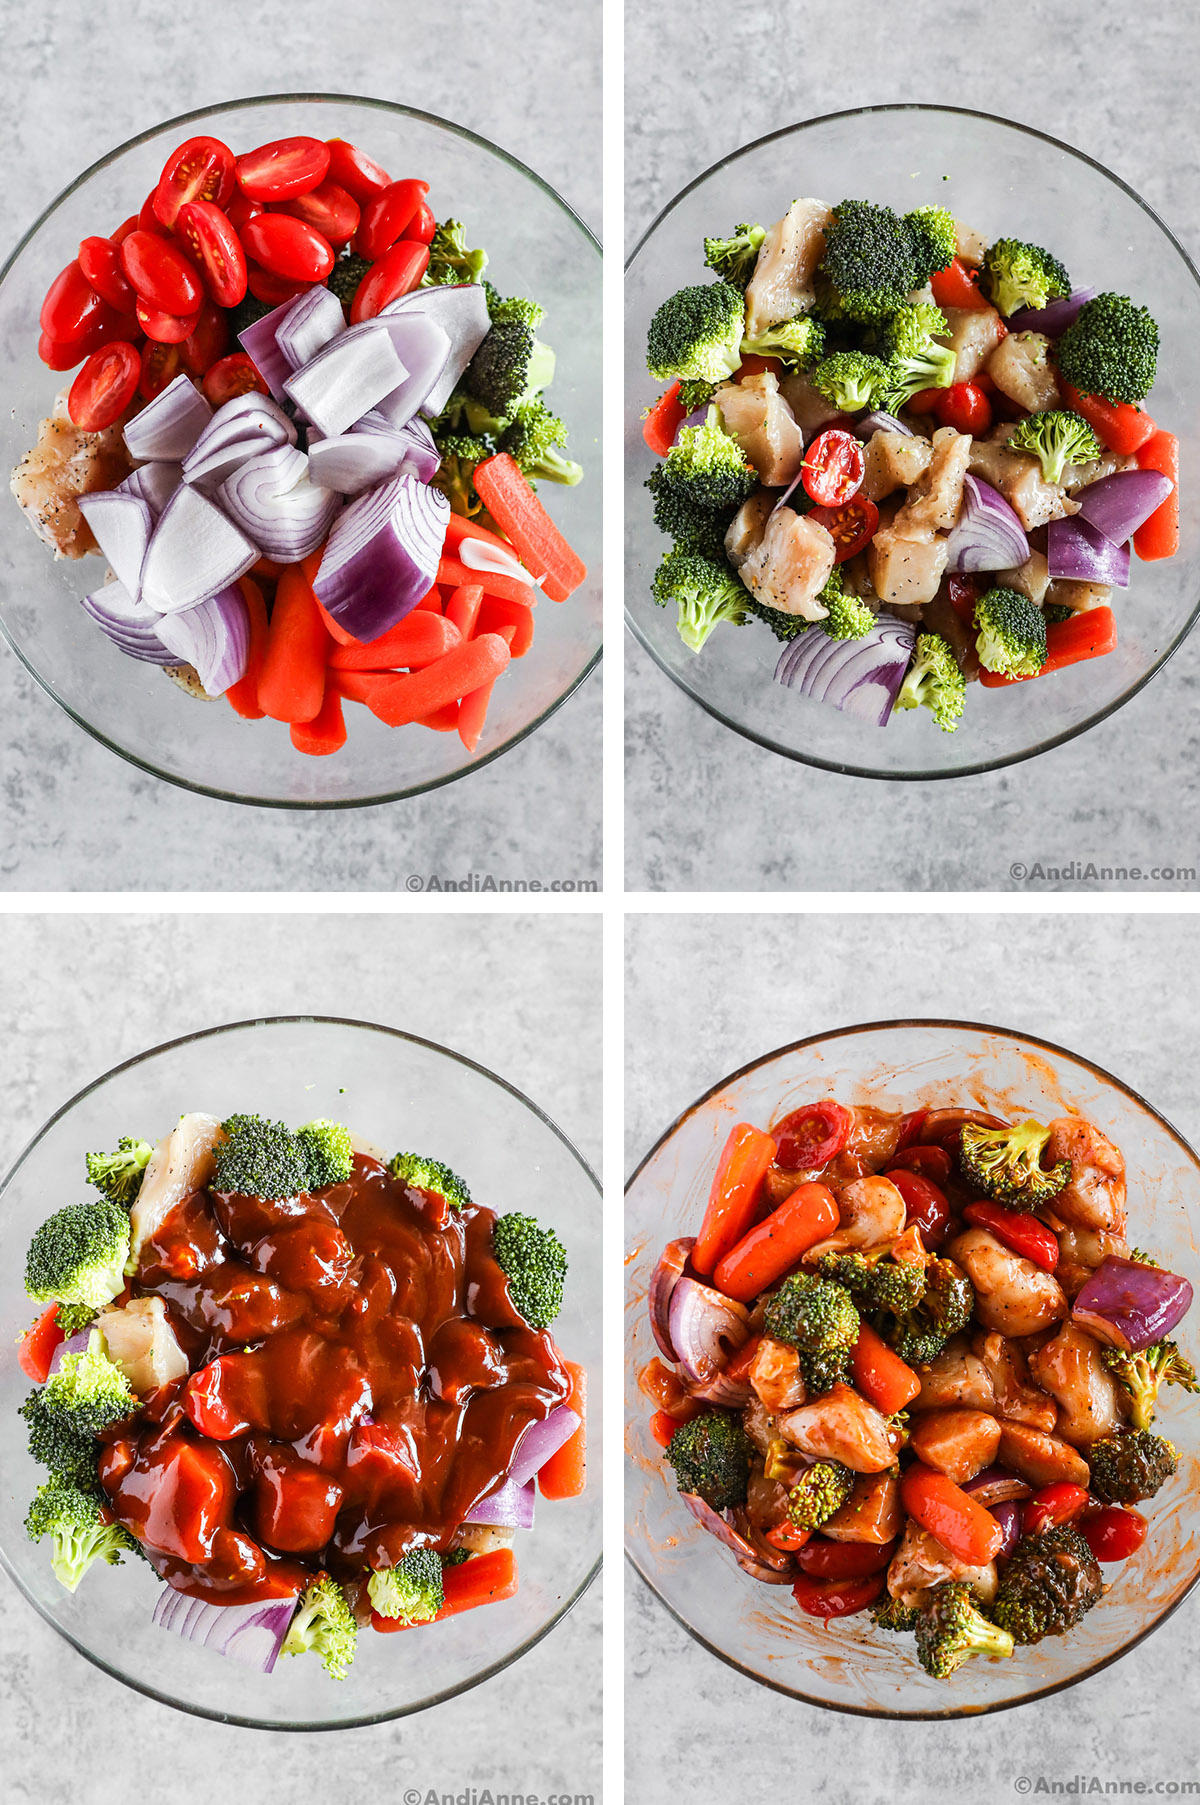 Four images of a clear glass bowl, First is chopped vegetables dumped in. Second is broccoli, tomato, onion and raw chicken mixed together. Third is barbecue sauce poured overtop. Fourth is ingredients mixed together.